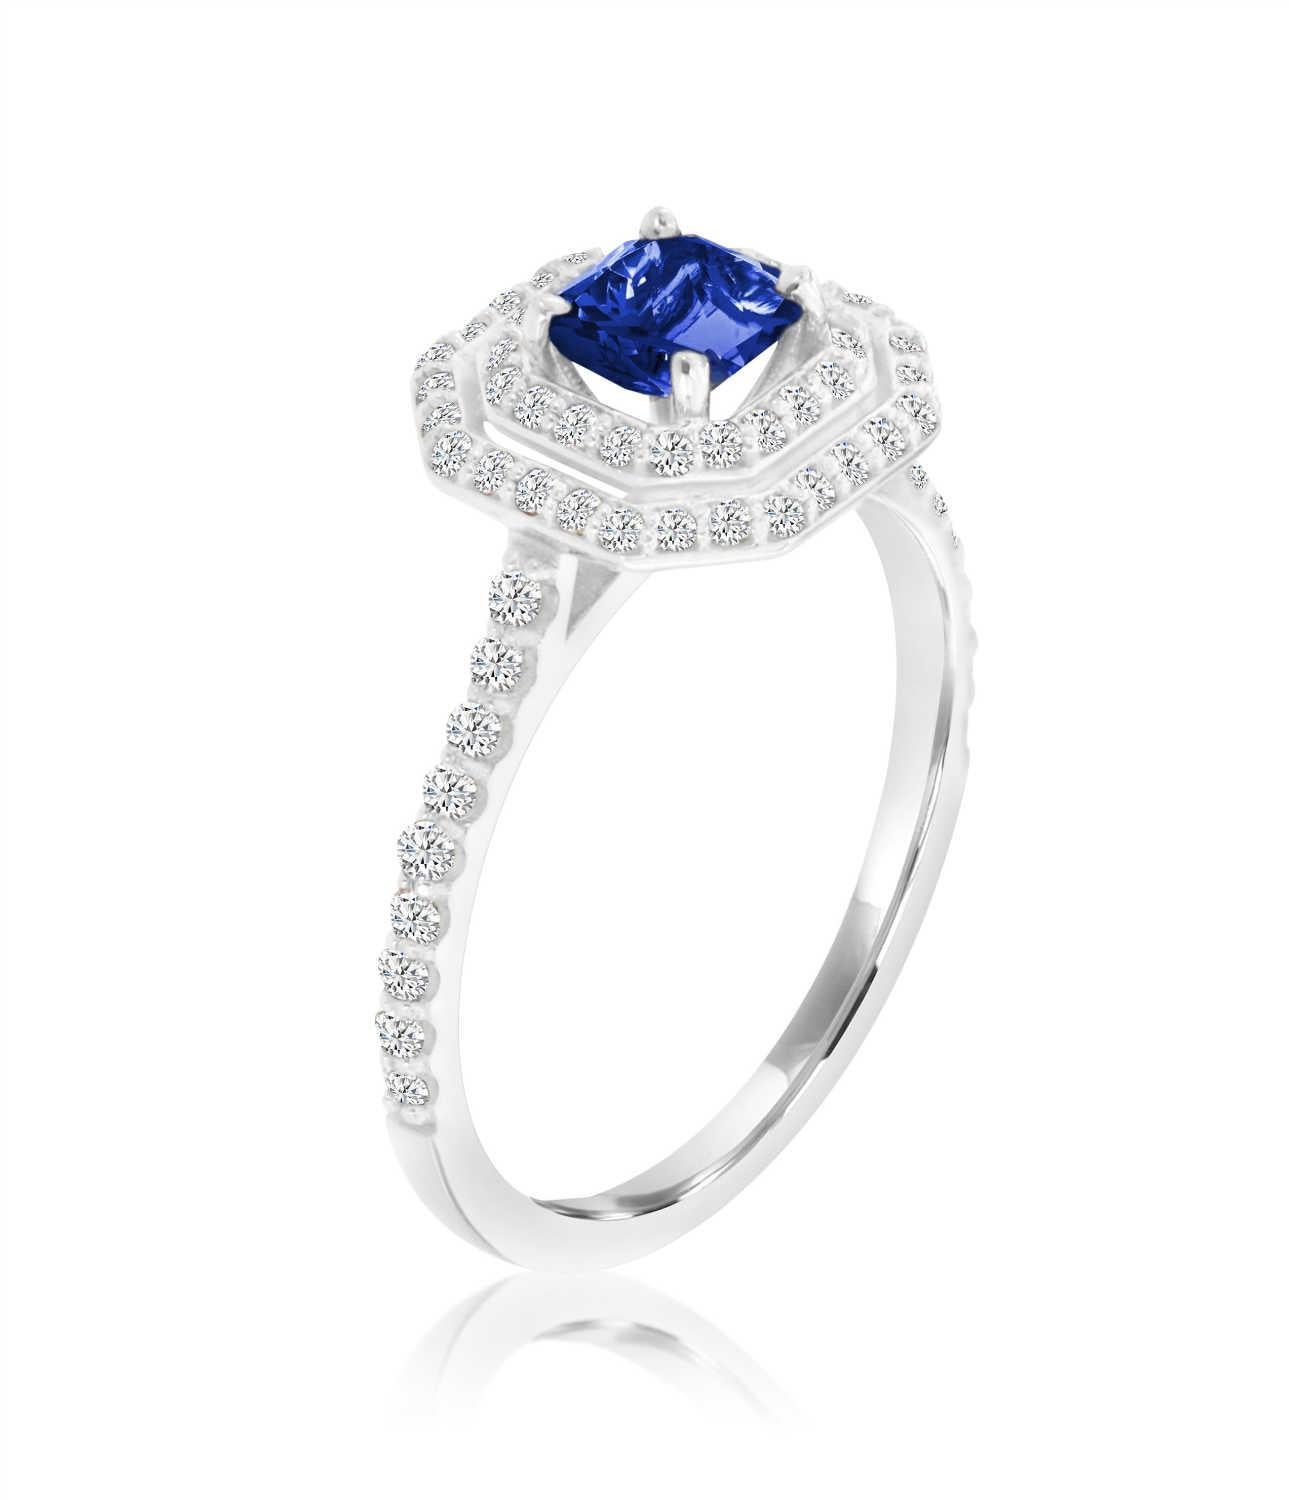 This delicate ring features a 0.62-carat Asscher cut Vibrant Blue Sri-Lankan Sapphire encircles by a double halo of round brilliant diamonds. A scalloped micro-prong set diamonds add a dazzling effect. Experience the difference in person!

Product